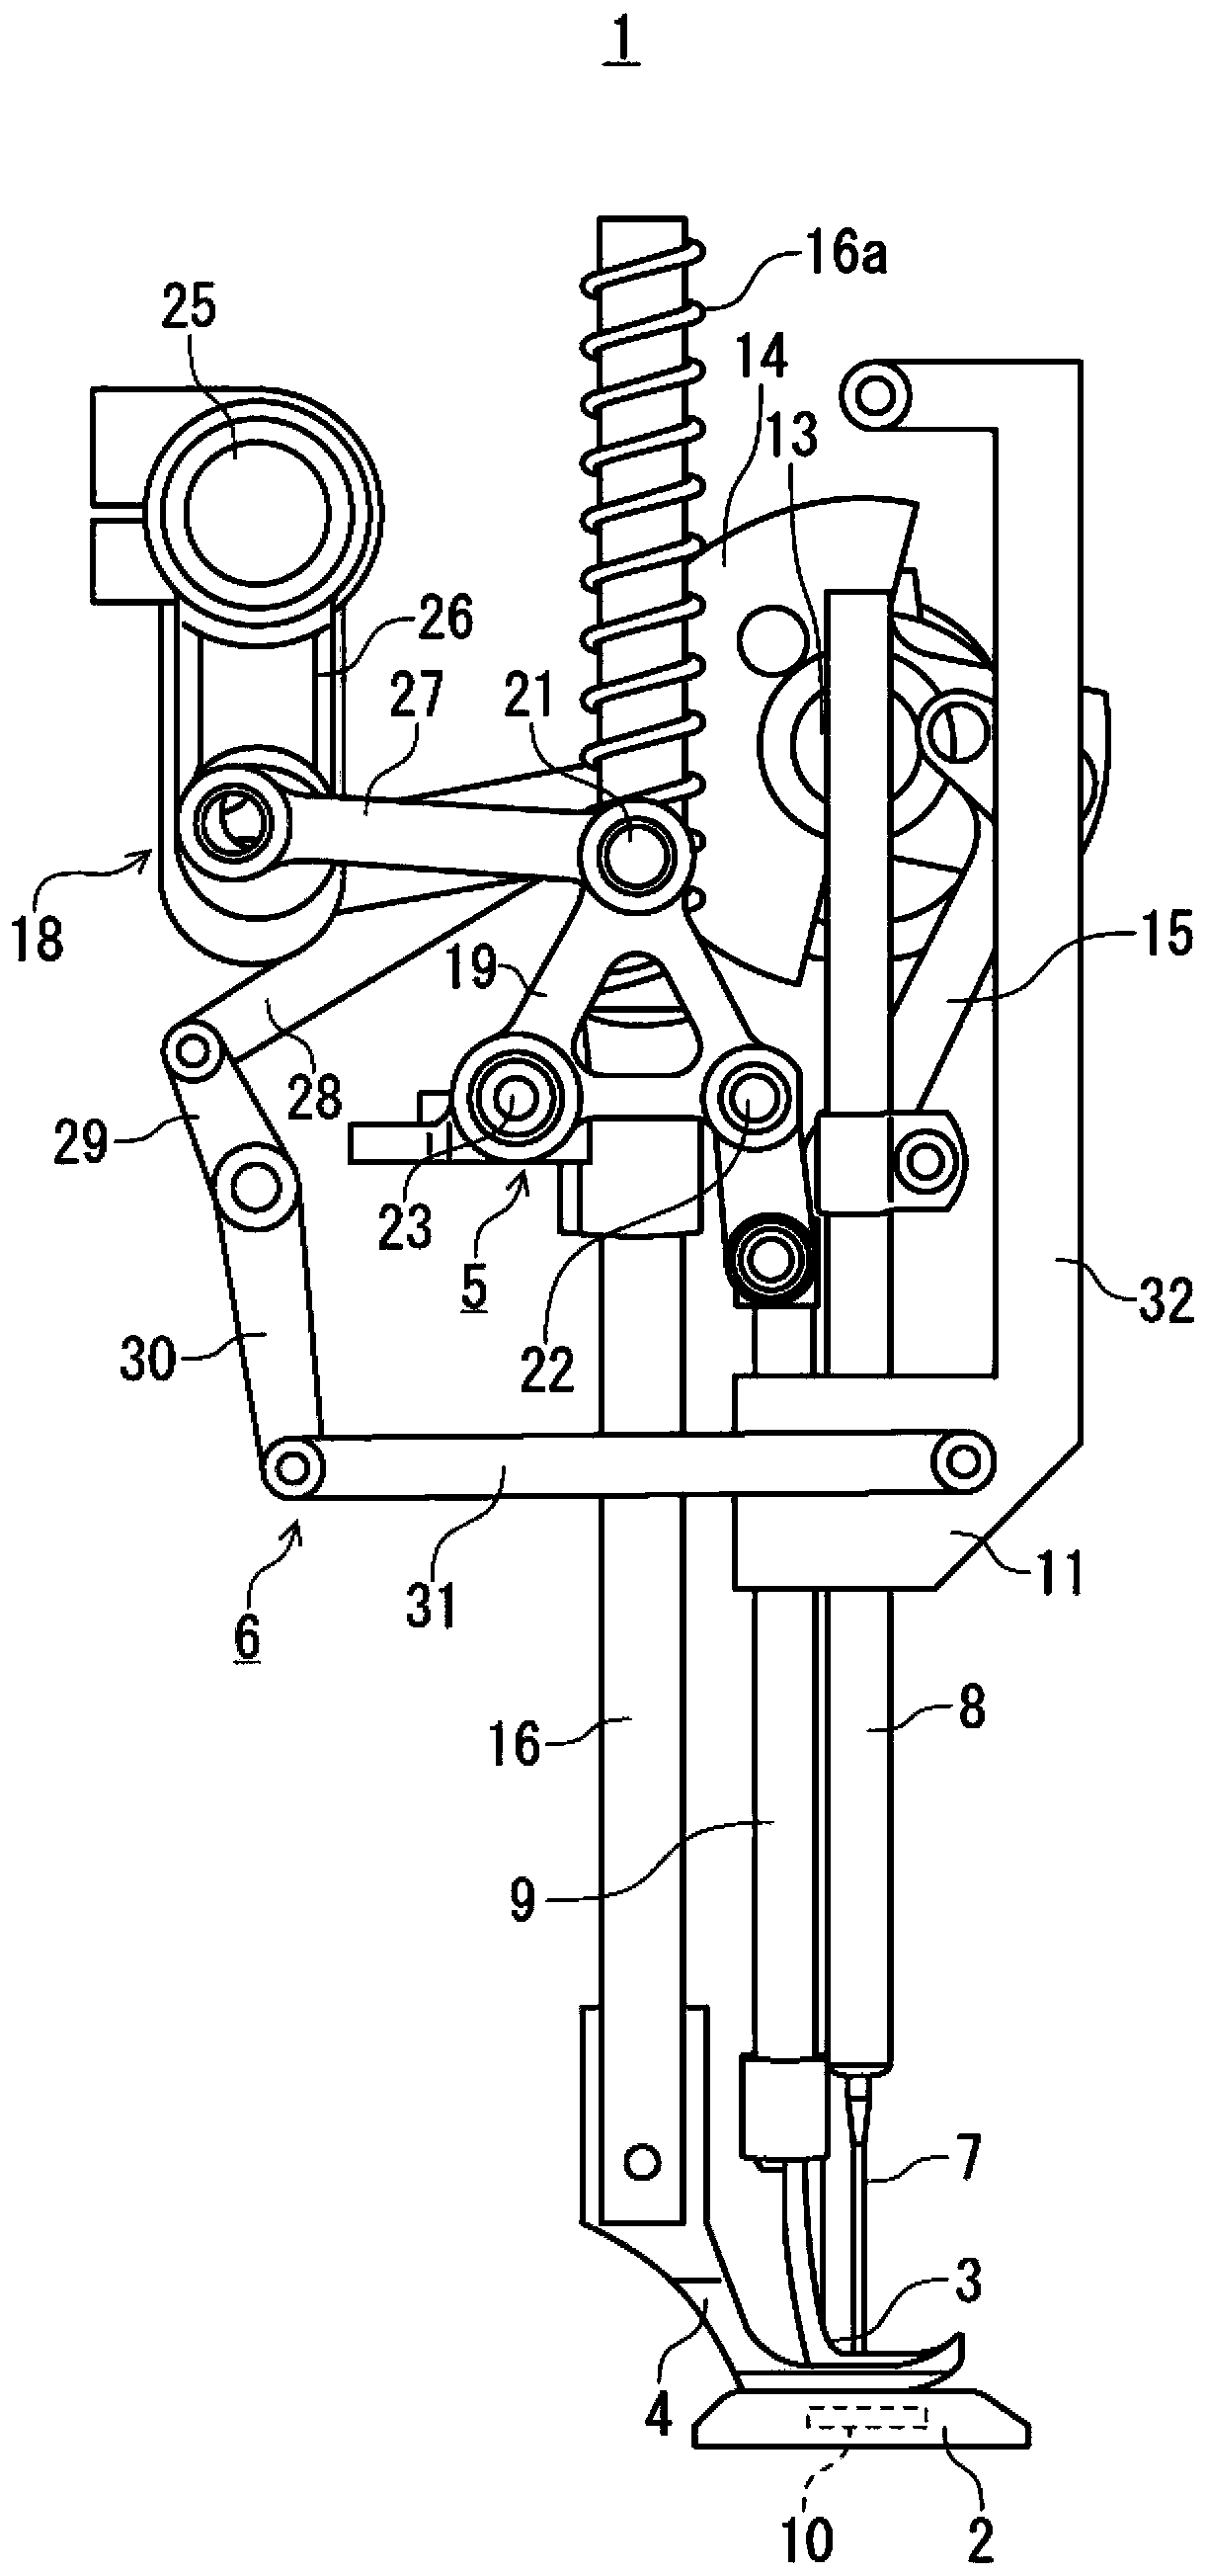 Control method of sewing machine